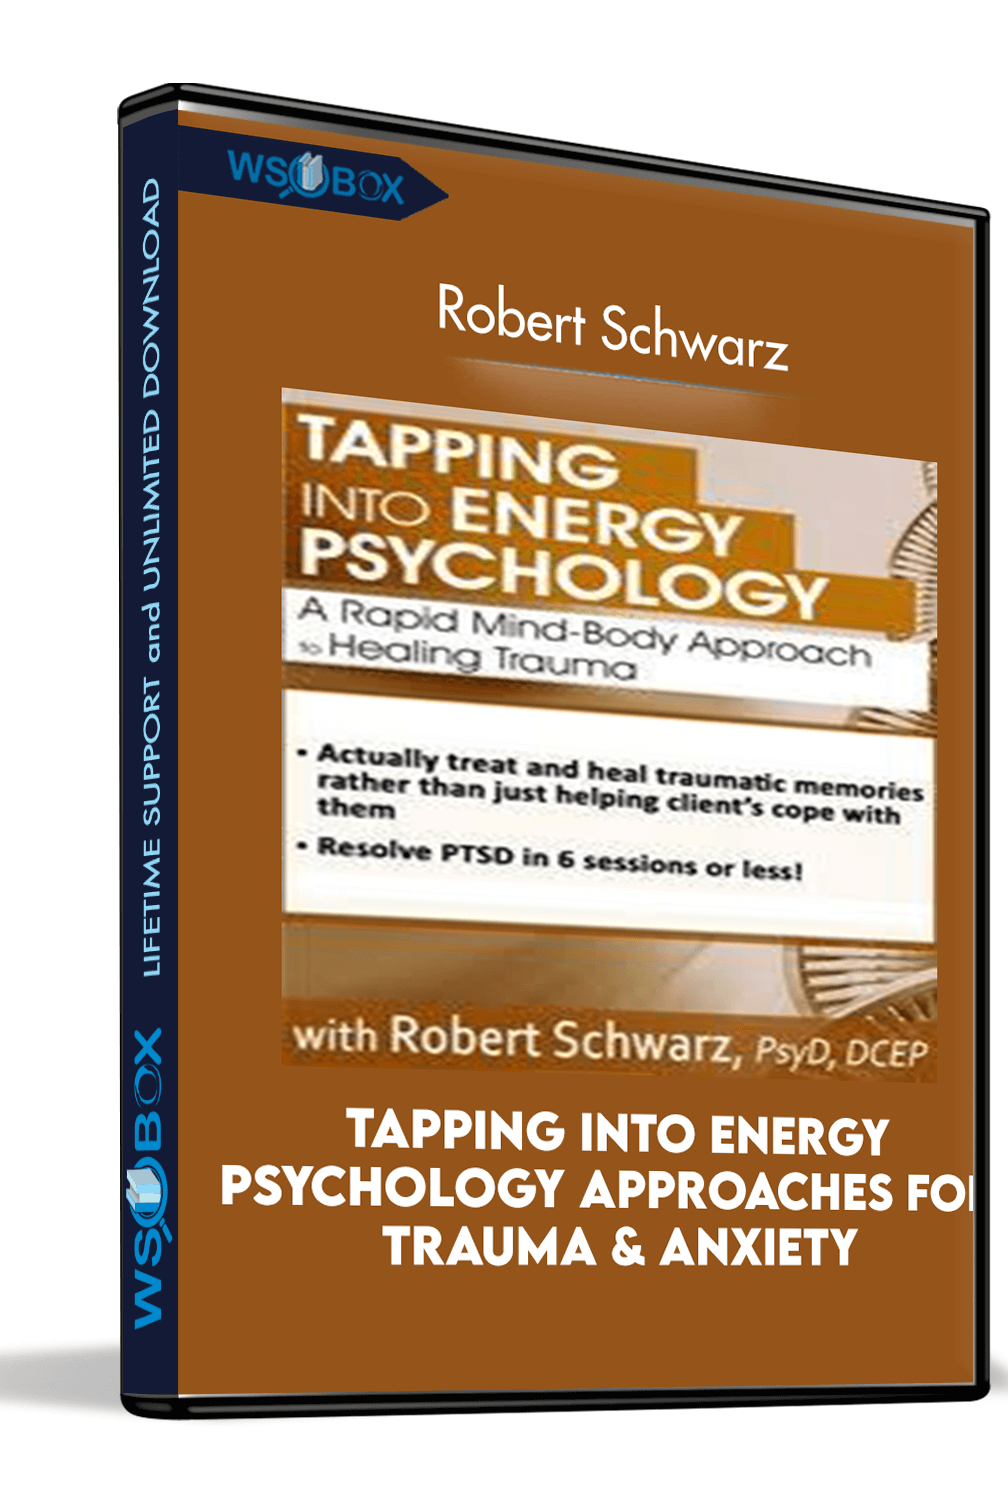 Tapping into Energy Psychology Approaches for Trauma & Anxiety – Robert Schwarz